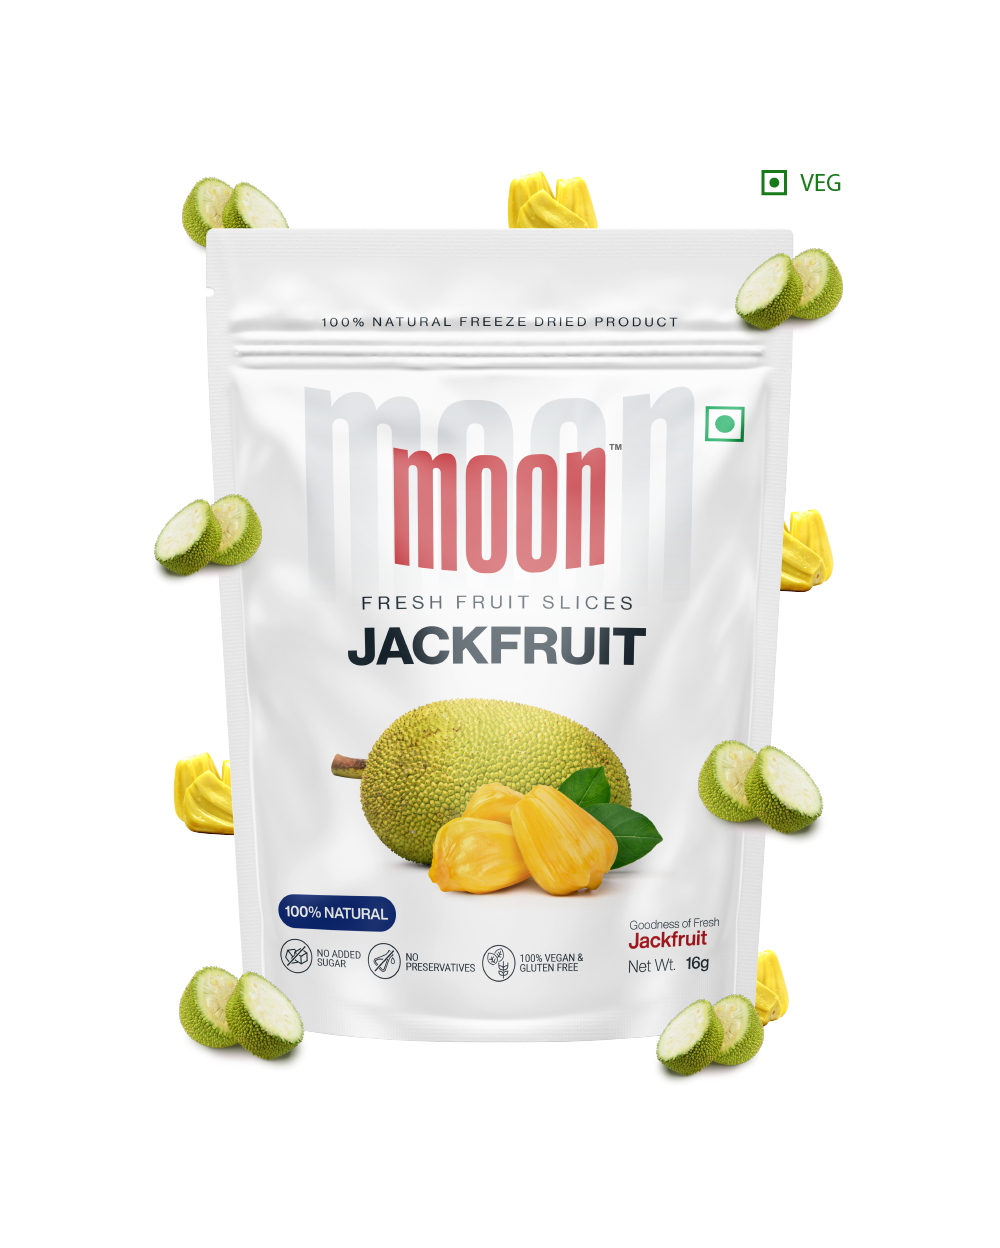 A bag of Moon Freeze Dried Jackfruit chips on a white background, highlighting its health benefits and high vitamin C content.